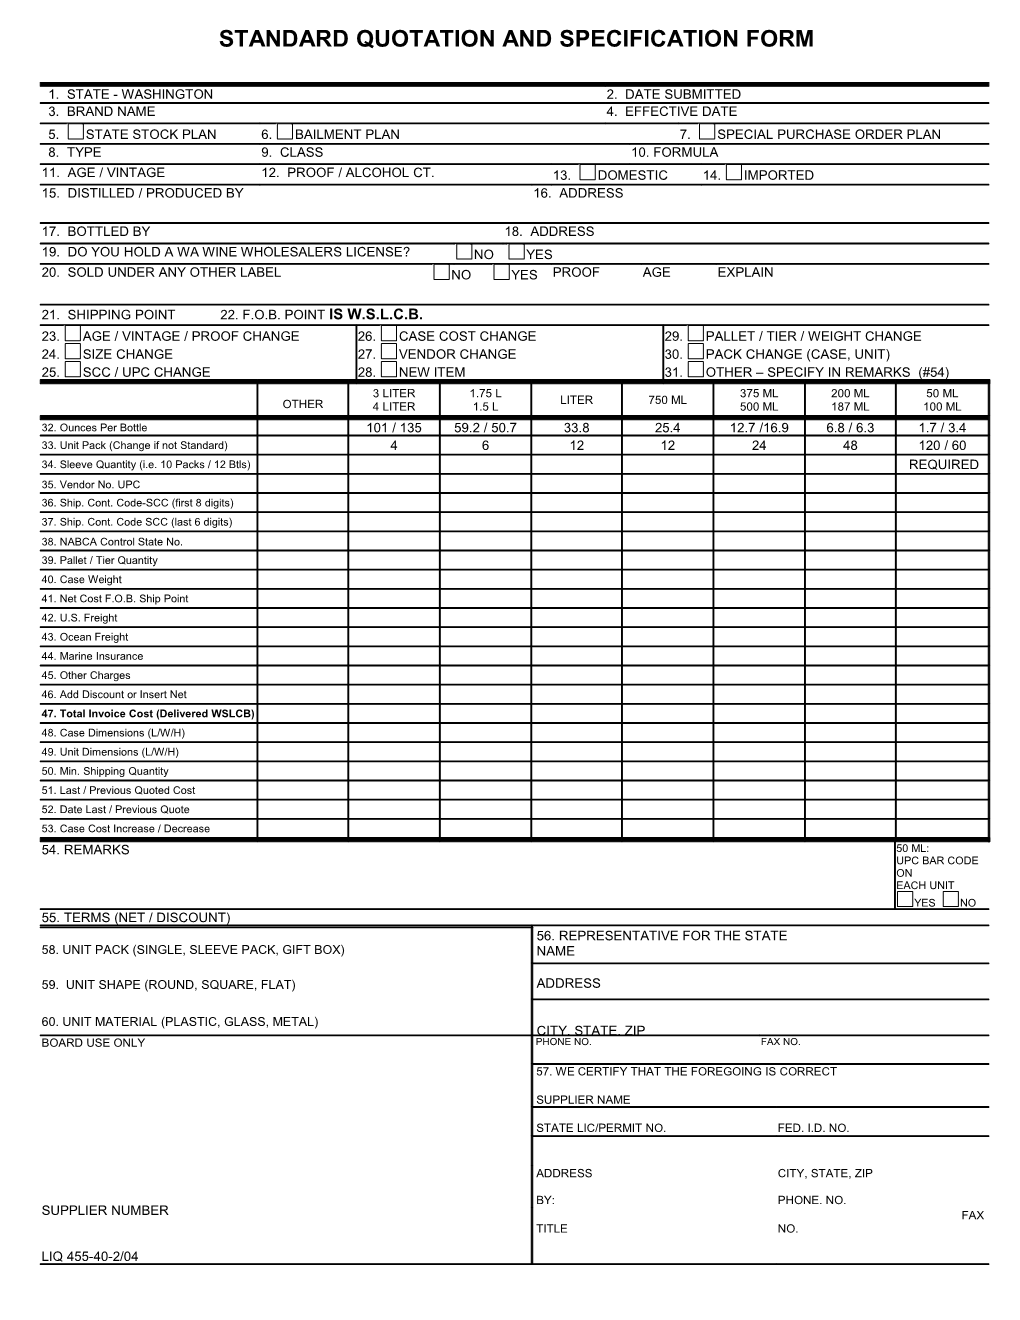 Standard Quotation And Specification Form